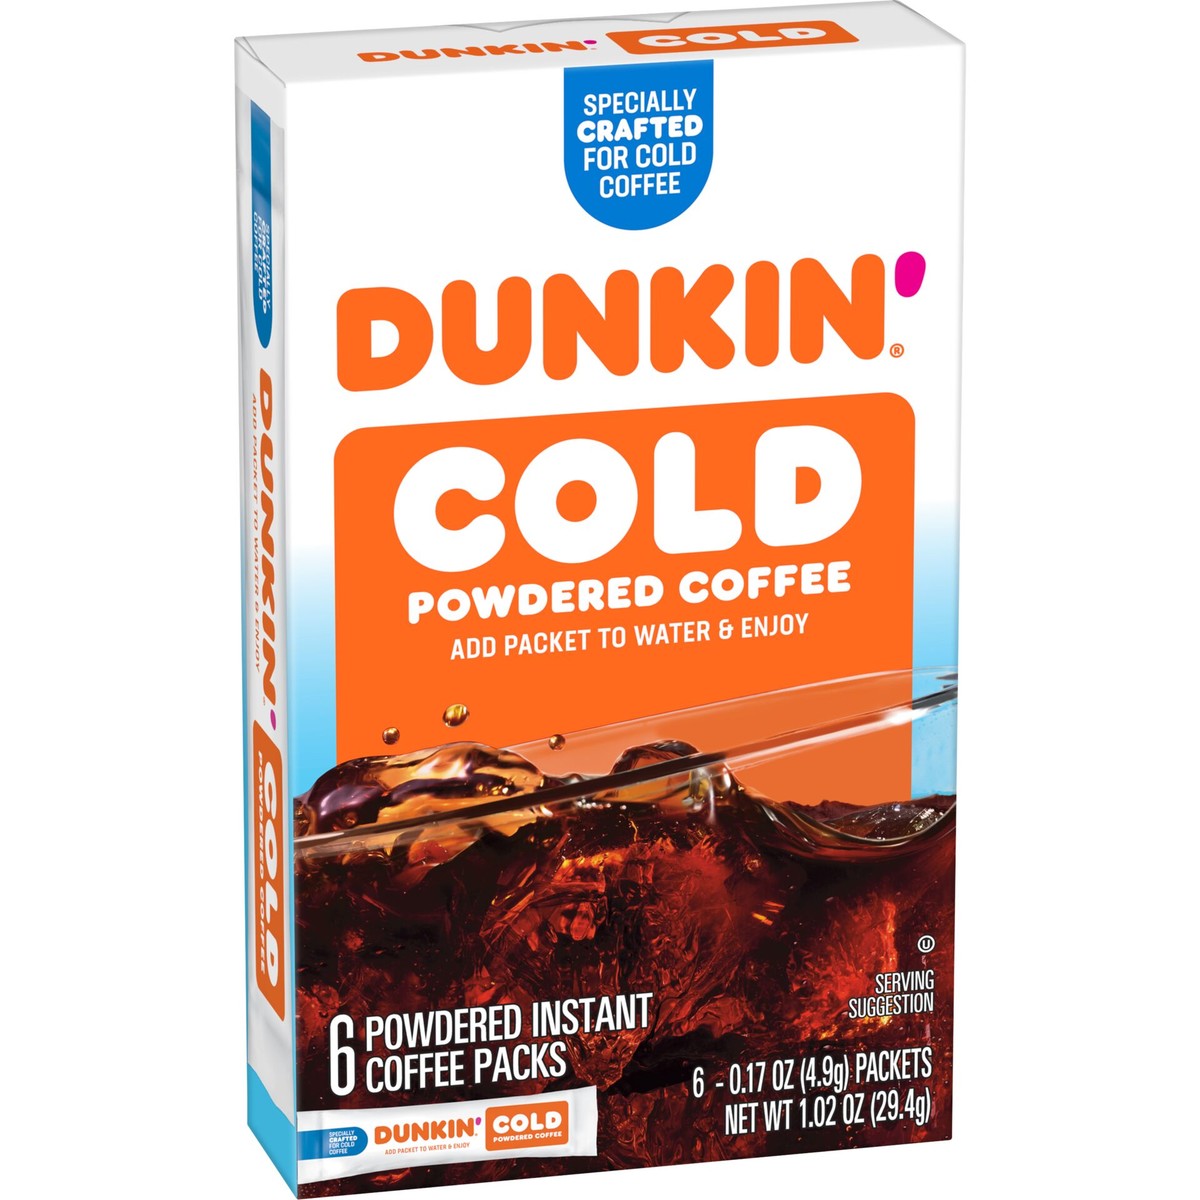 Powdered Instant Iced Coffee Packets